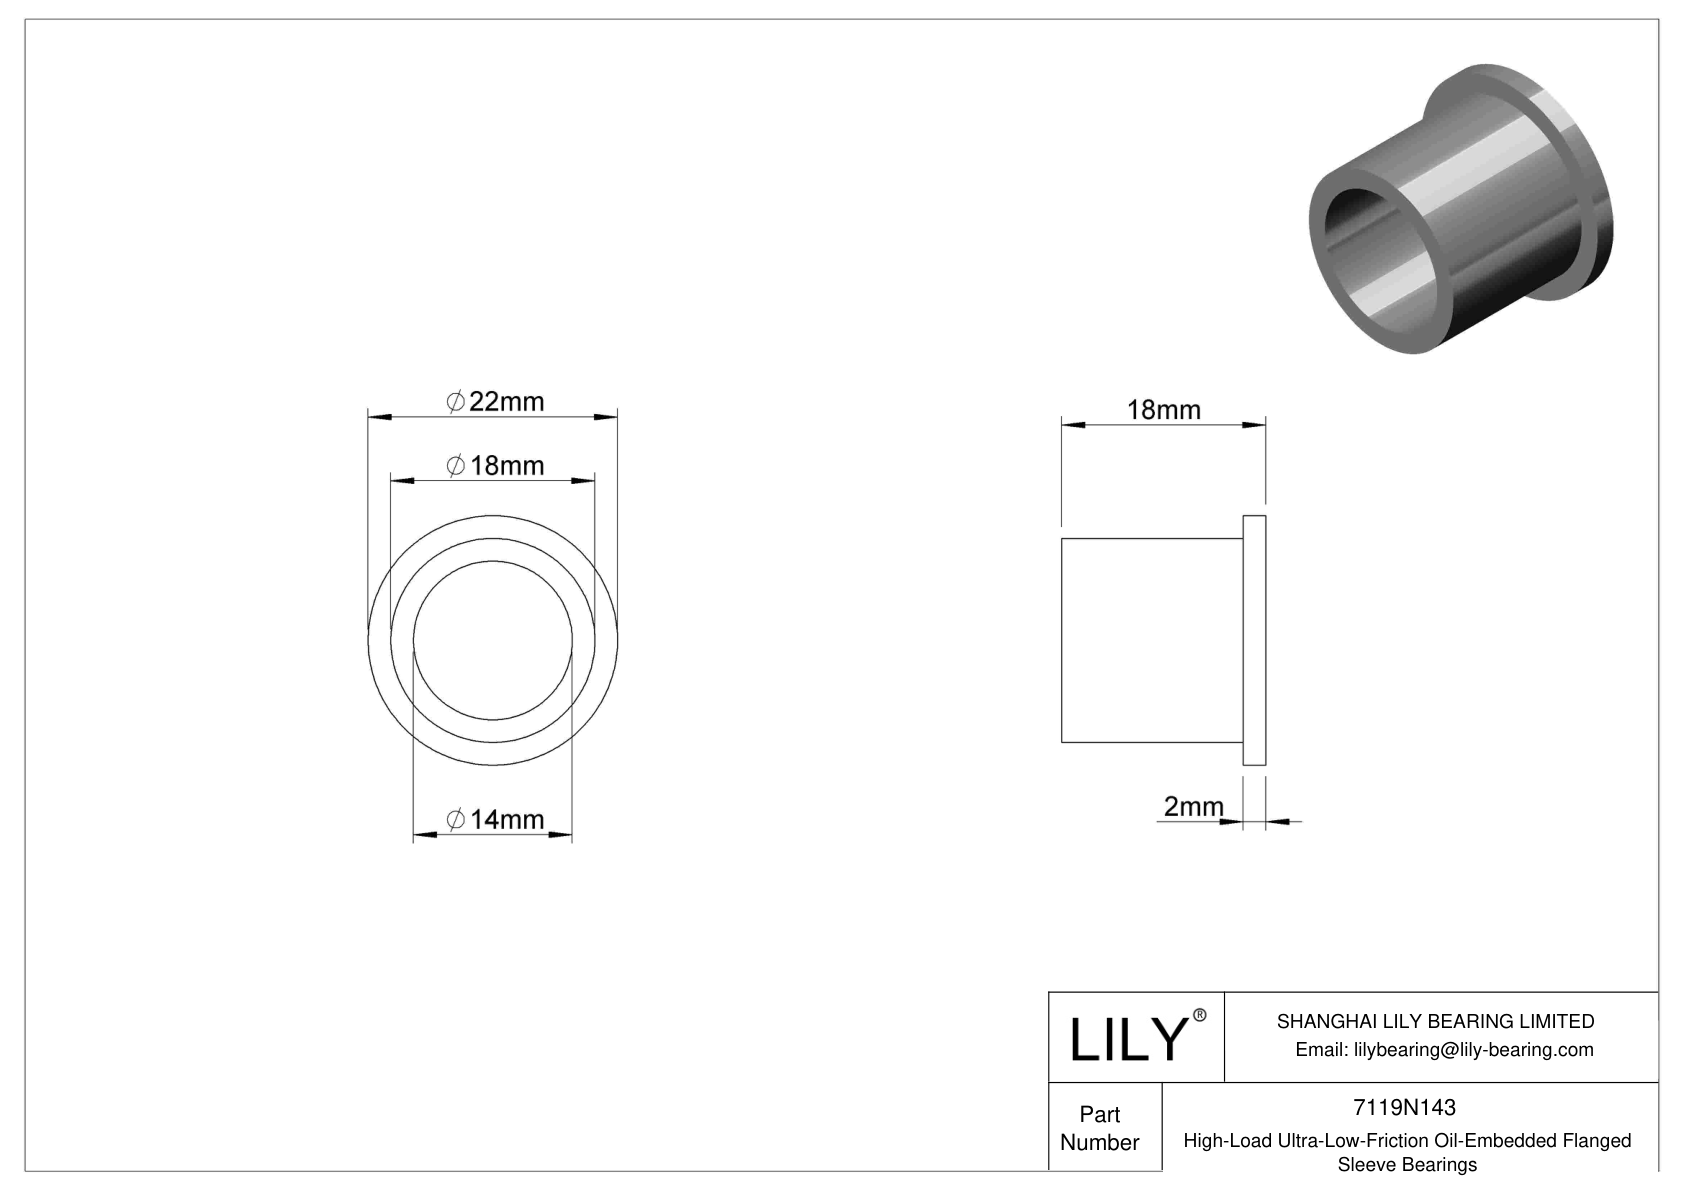 HBBJNBED High-Load Ultra-Low-Friction Oil-Embedded Flanged Sleeve Bearings cad drawing